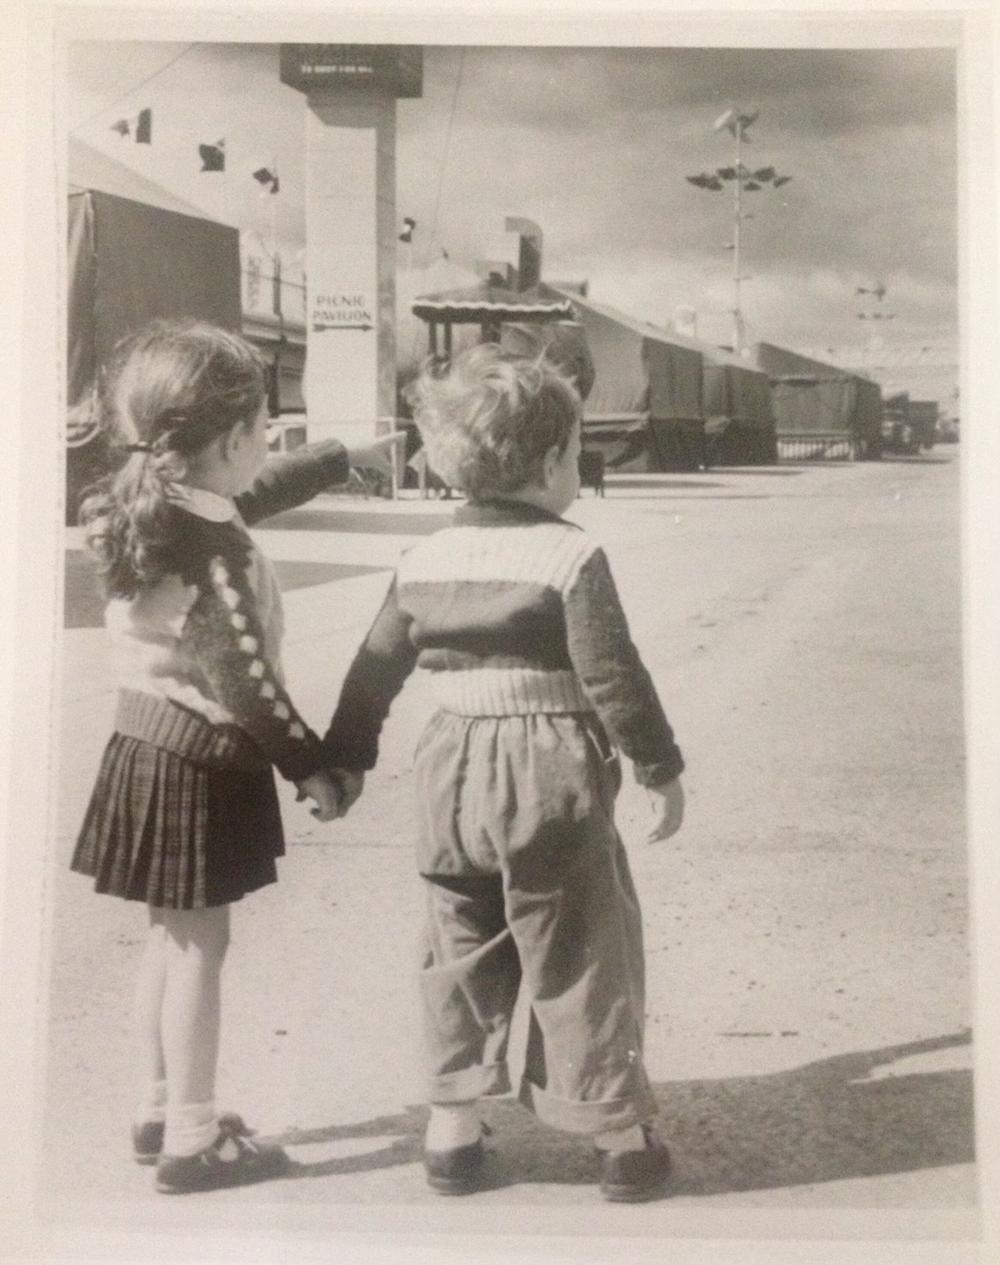 Bobby and Fritzi Huber hold hands at fairgrounds, circa 1950s.